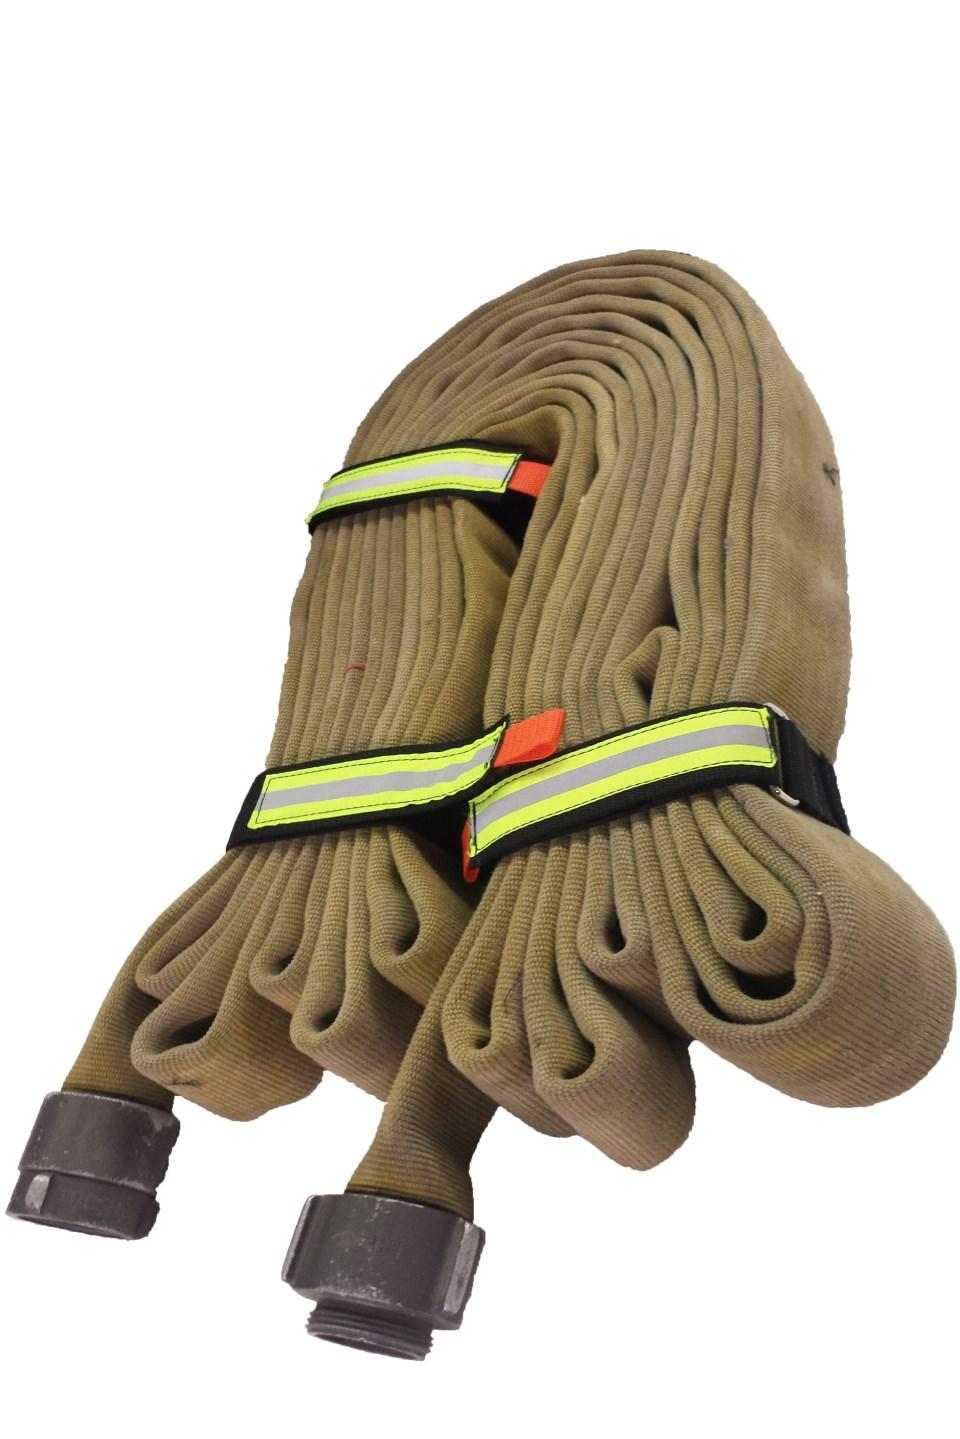 UTILITY ITEMS Denver Strap Made of 2 webbing and heavy-duty Velcro.